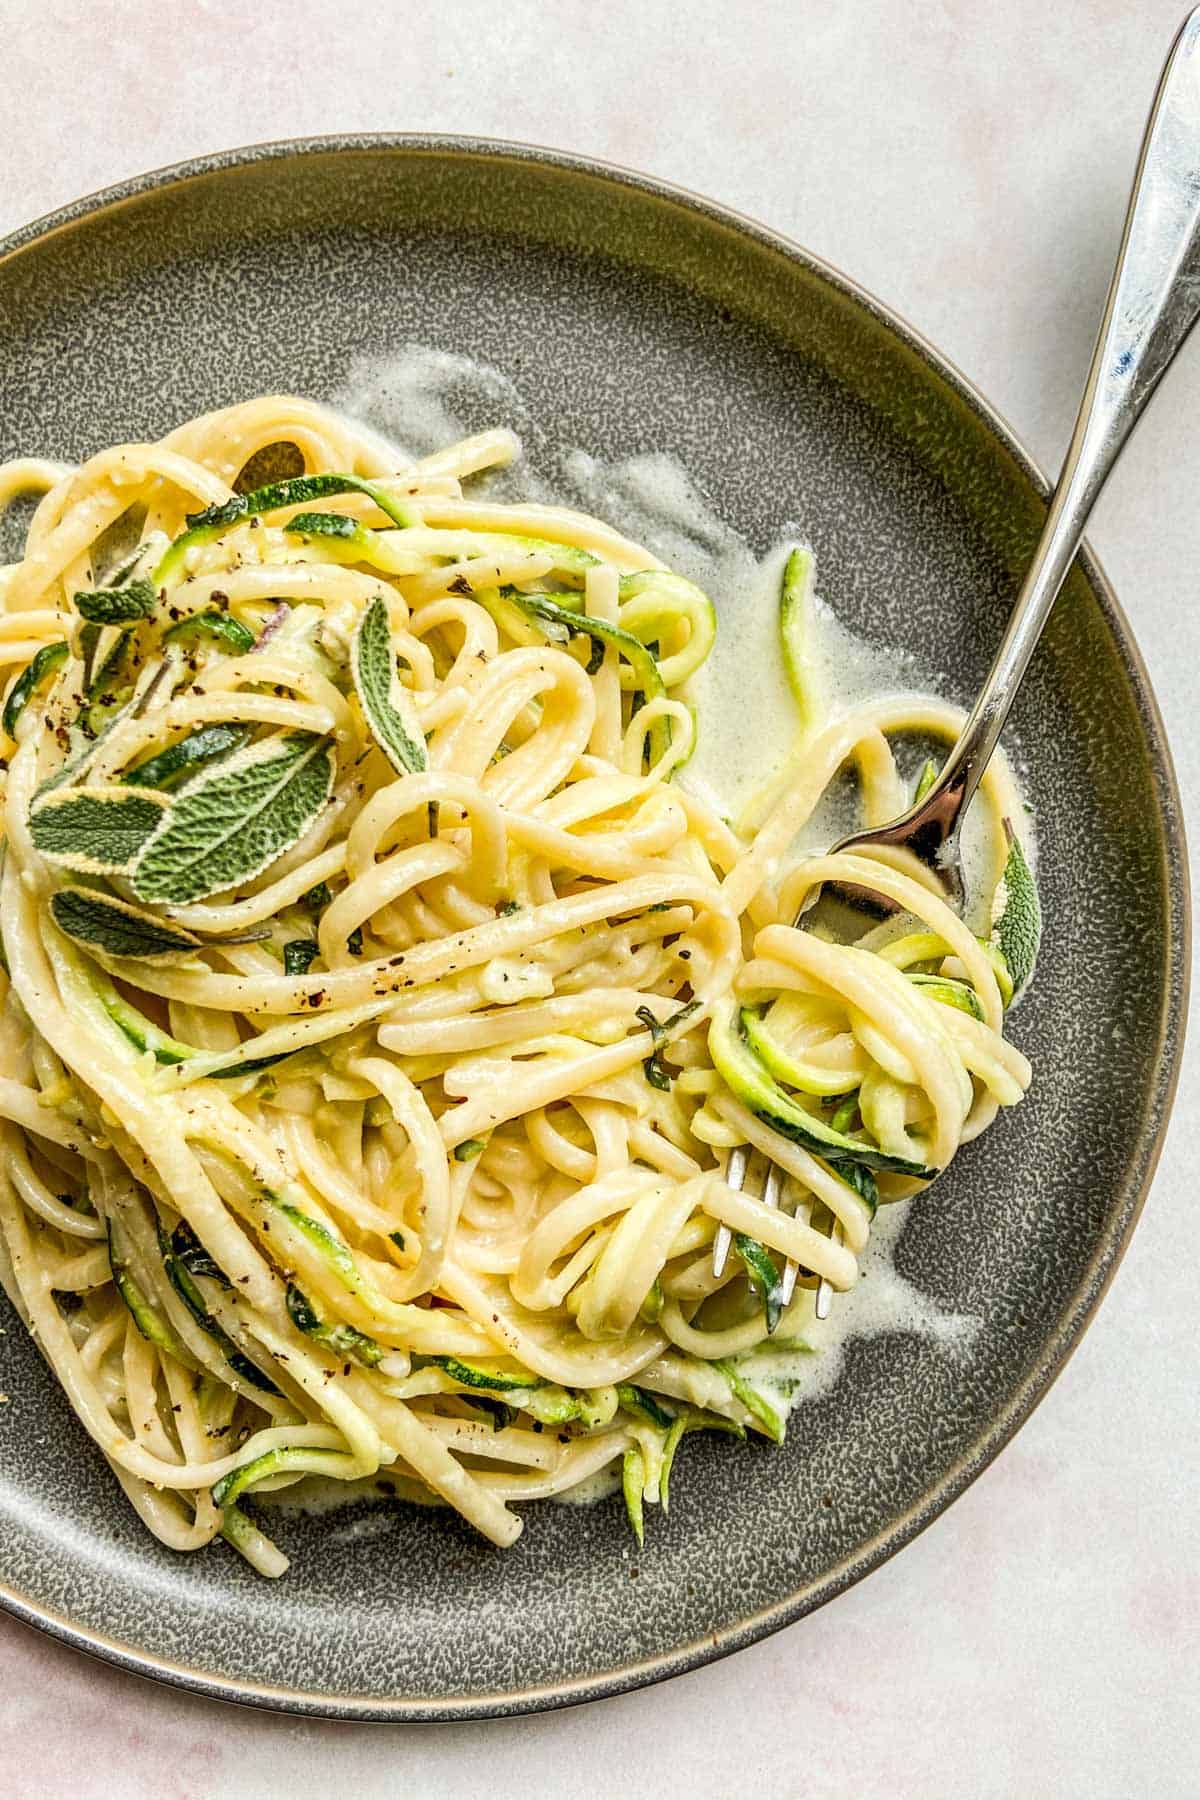 A fork scooping up some zucchini pasta.